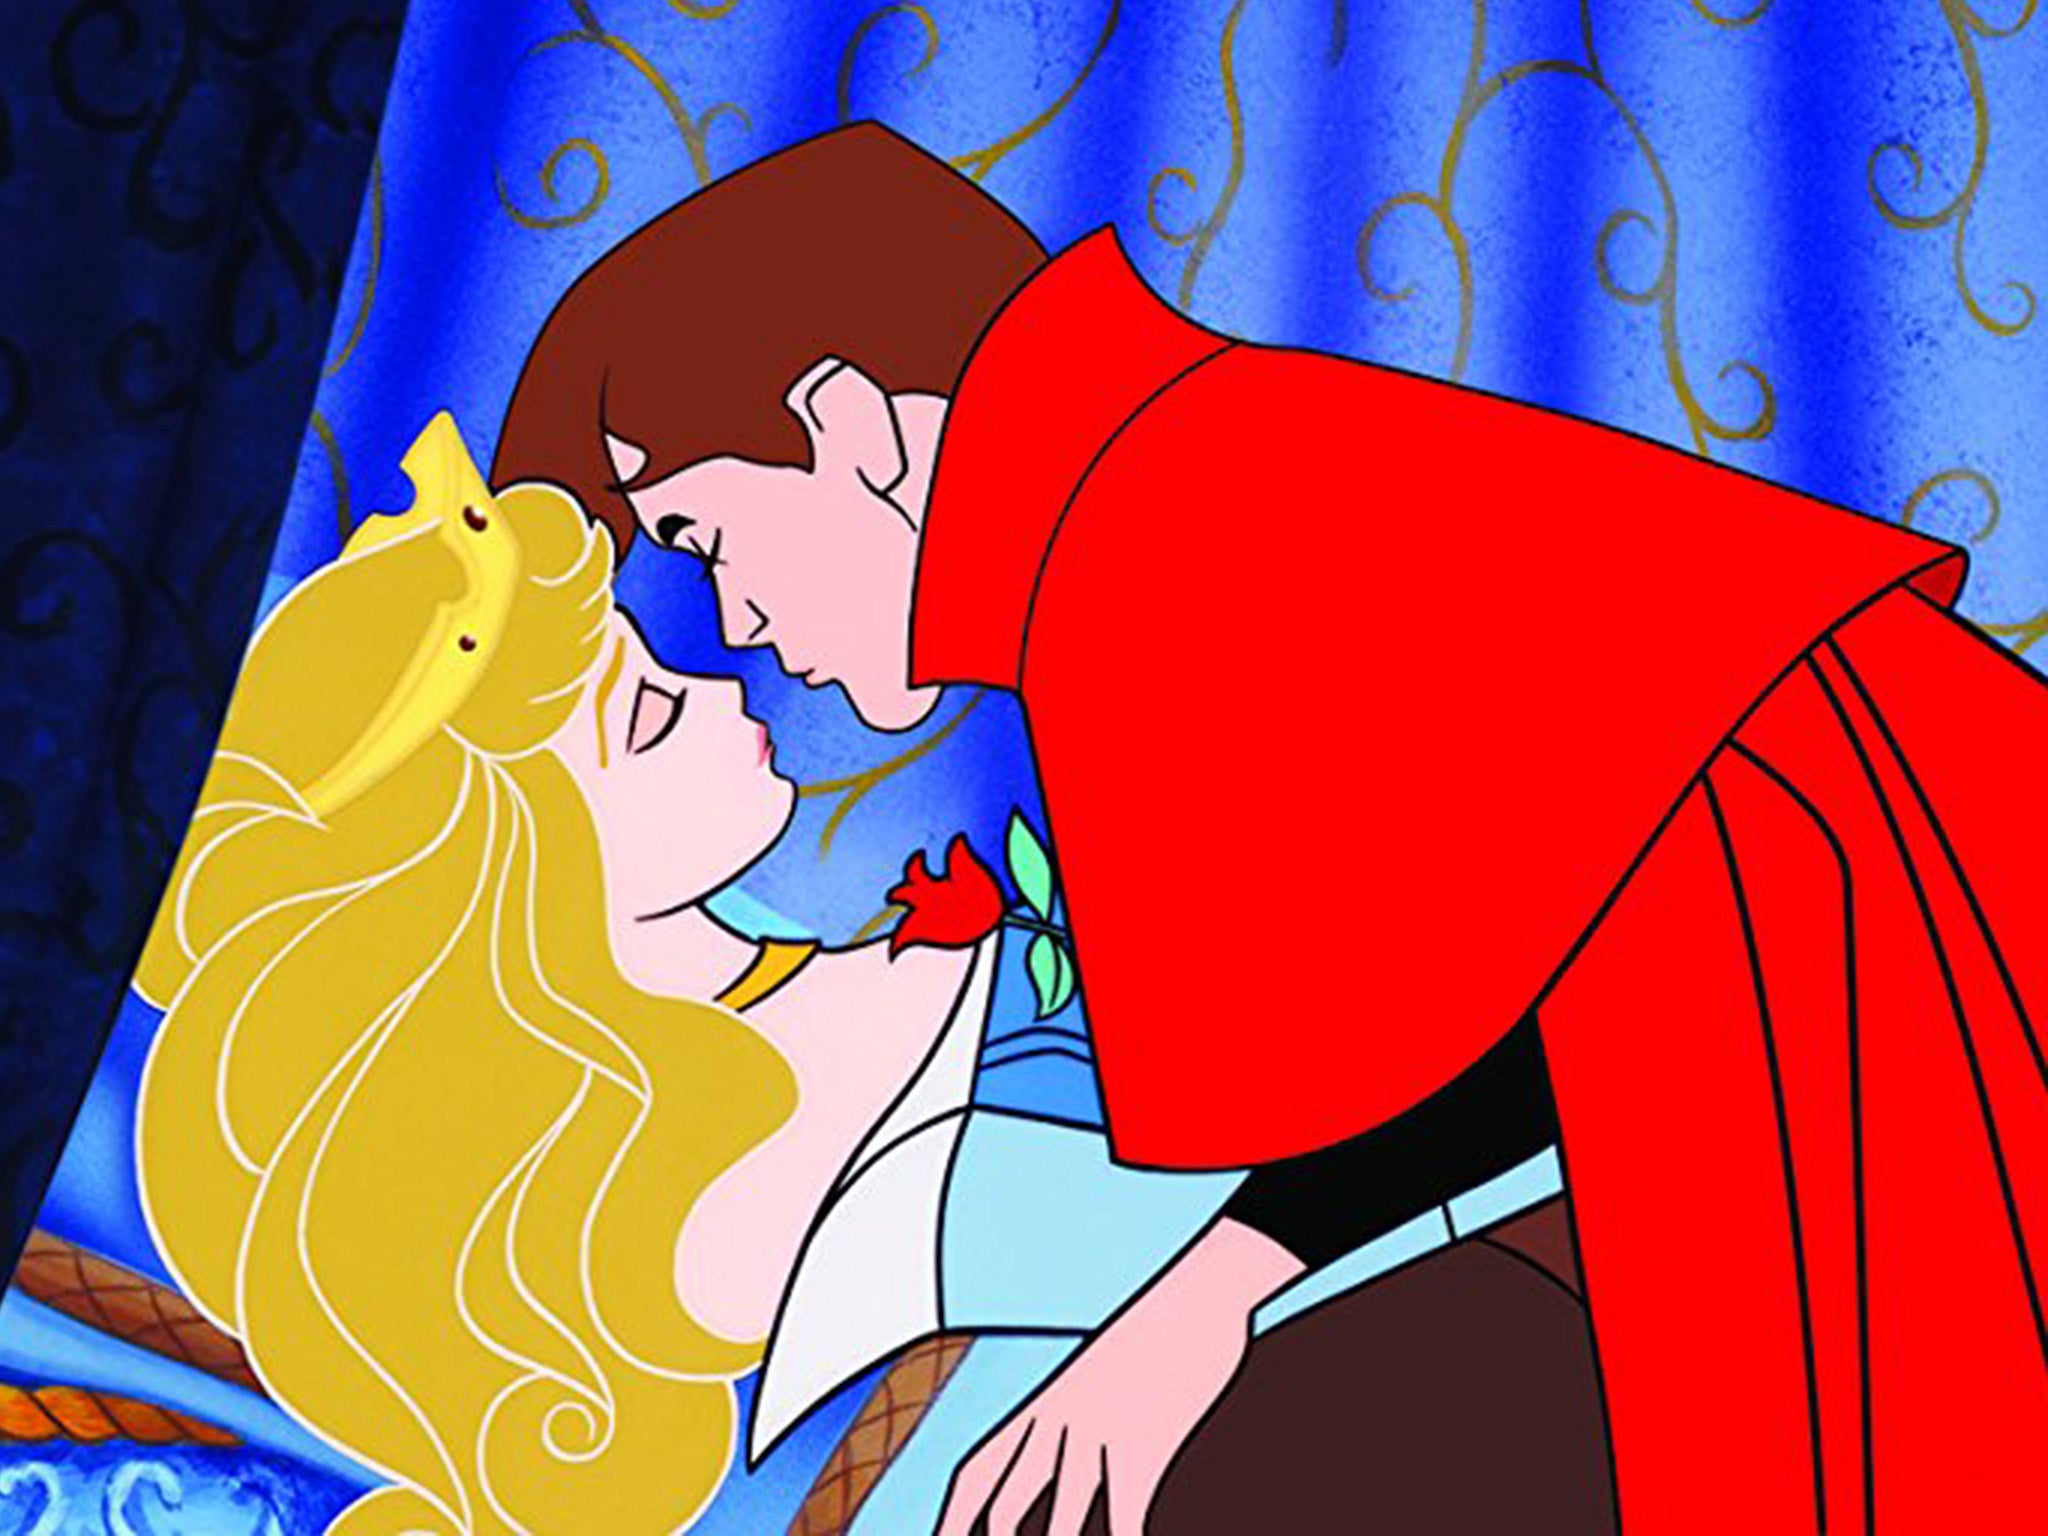 Snow White Disney Cartoon Sex Porn - Fairytale princes in Snow White and Sleeping Beauty are sex offenders,  professor claims | The Independent | The Independent